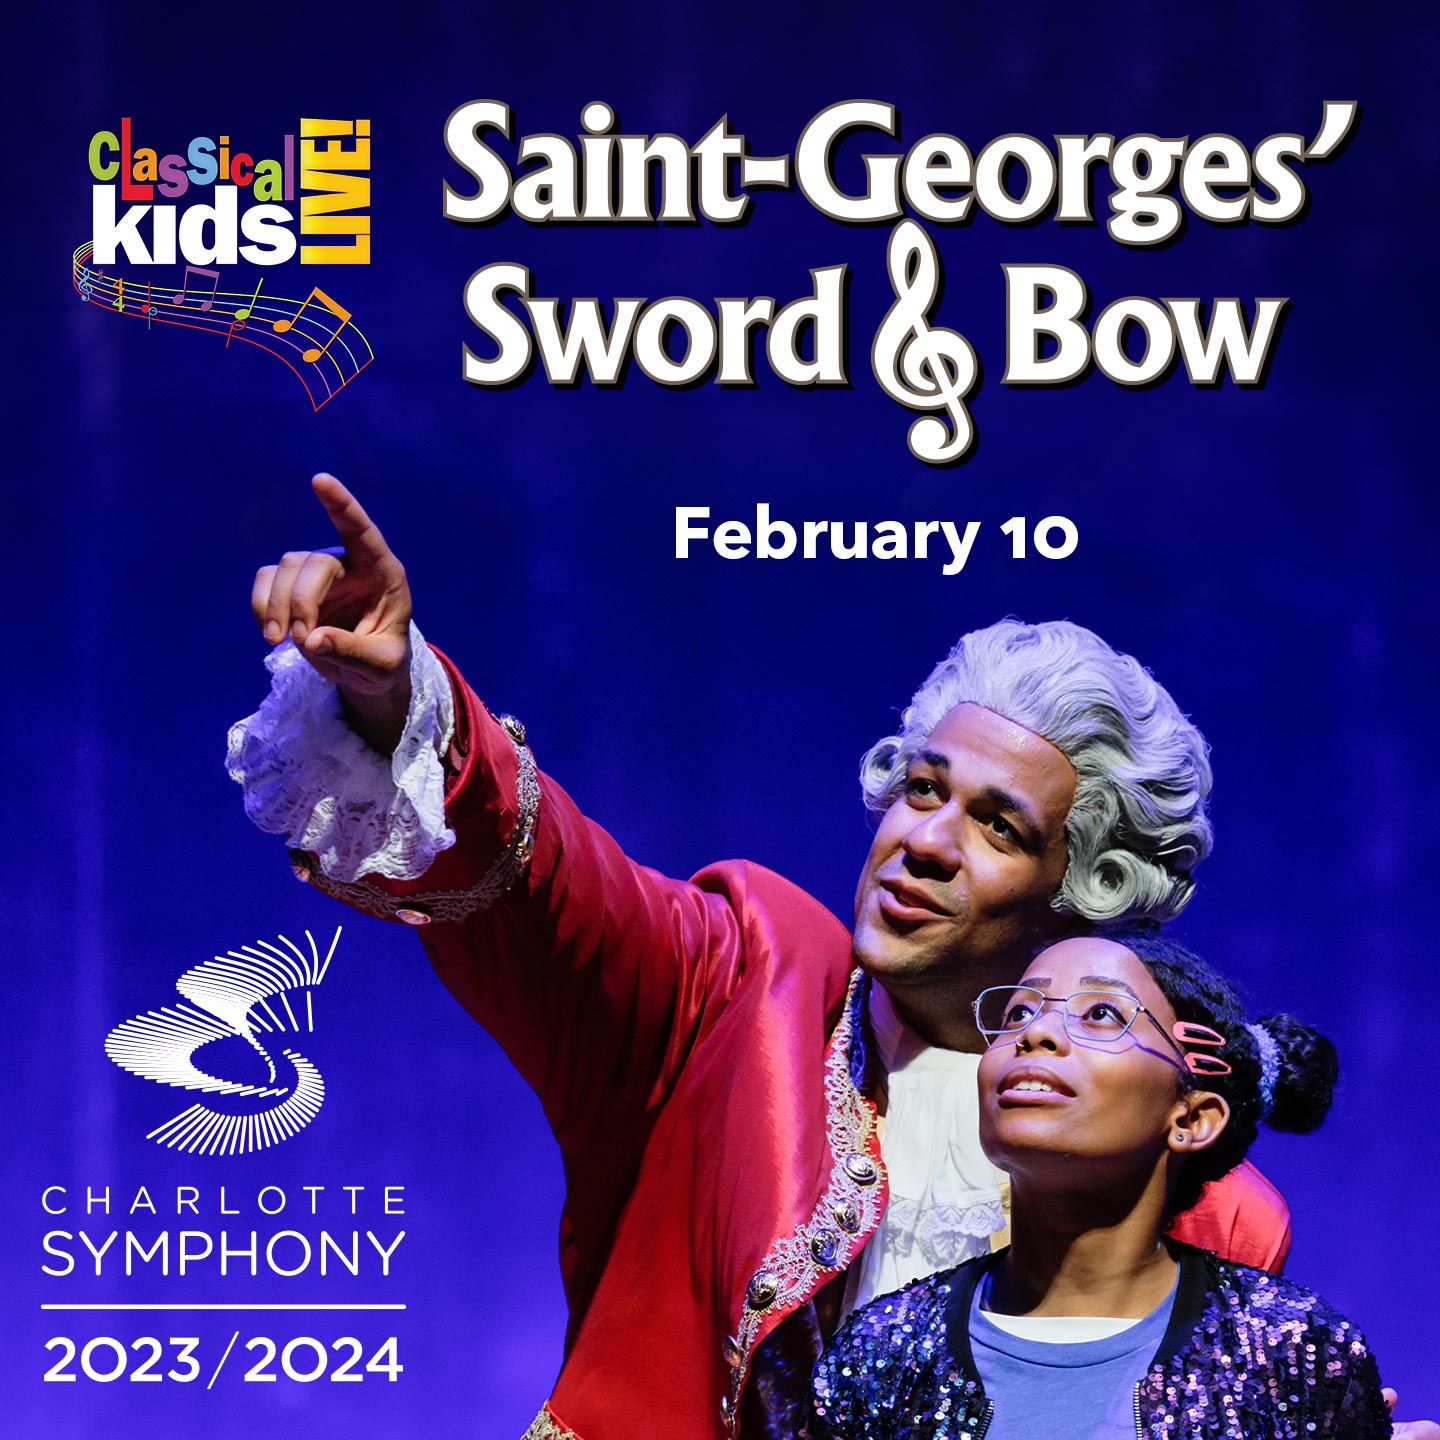 Charlotte Symphony: Saint-Georges' Sword and Bow